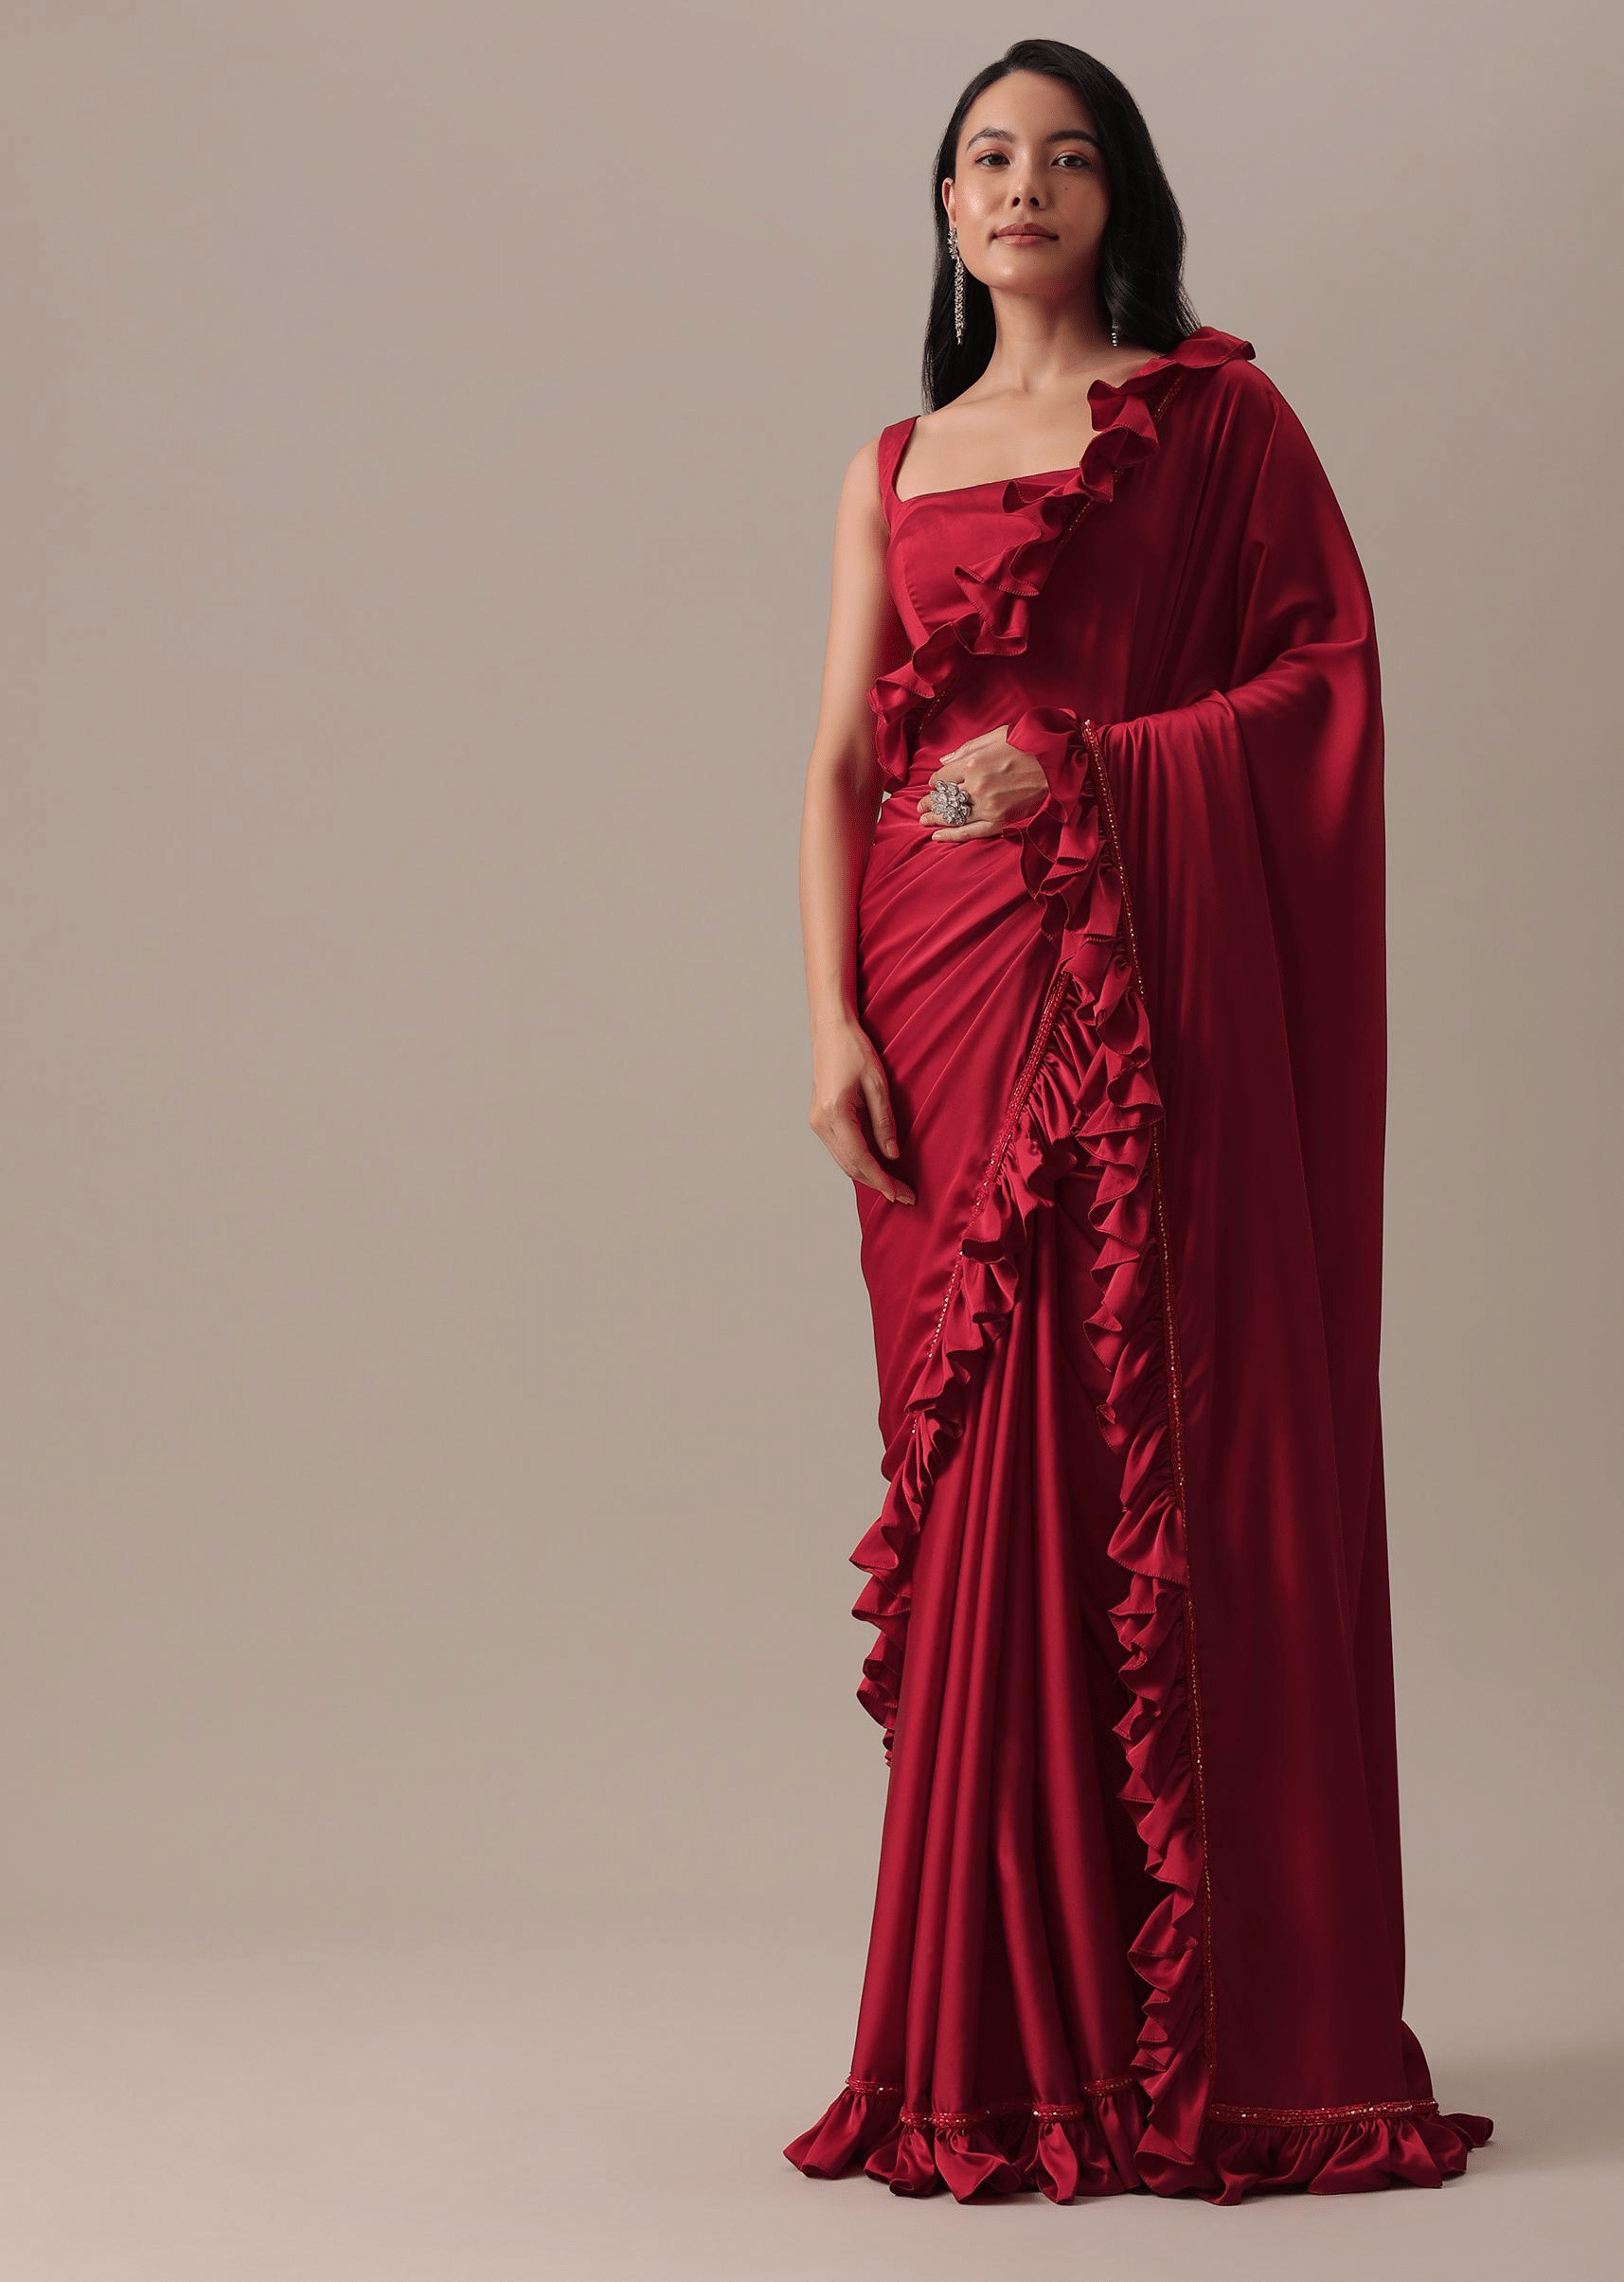 Buy Red Plain Satin Saree And Sleeveless Blouse With Cut Dana Lace